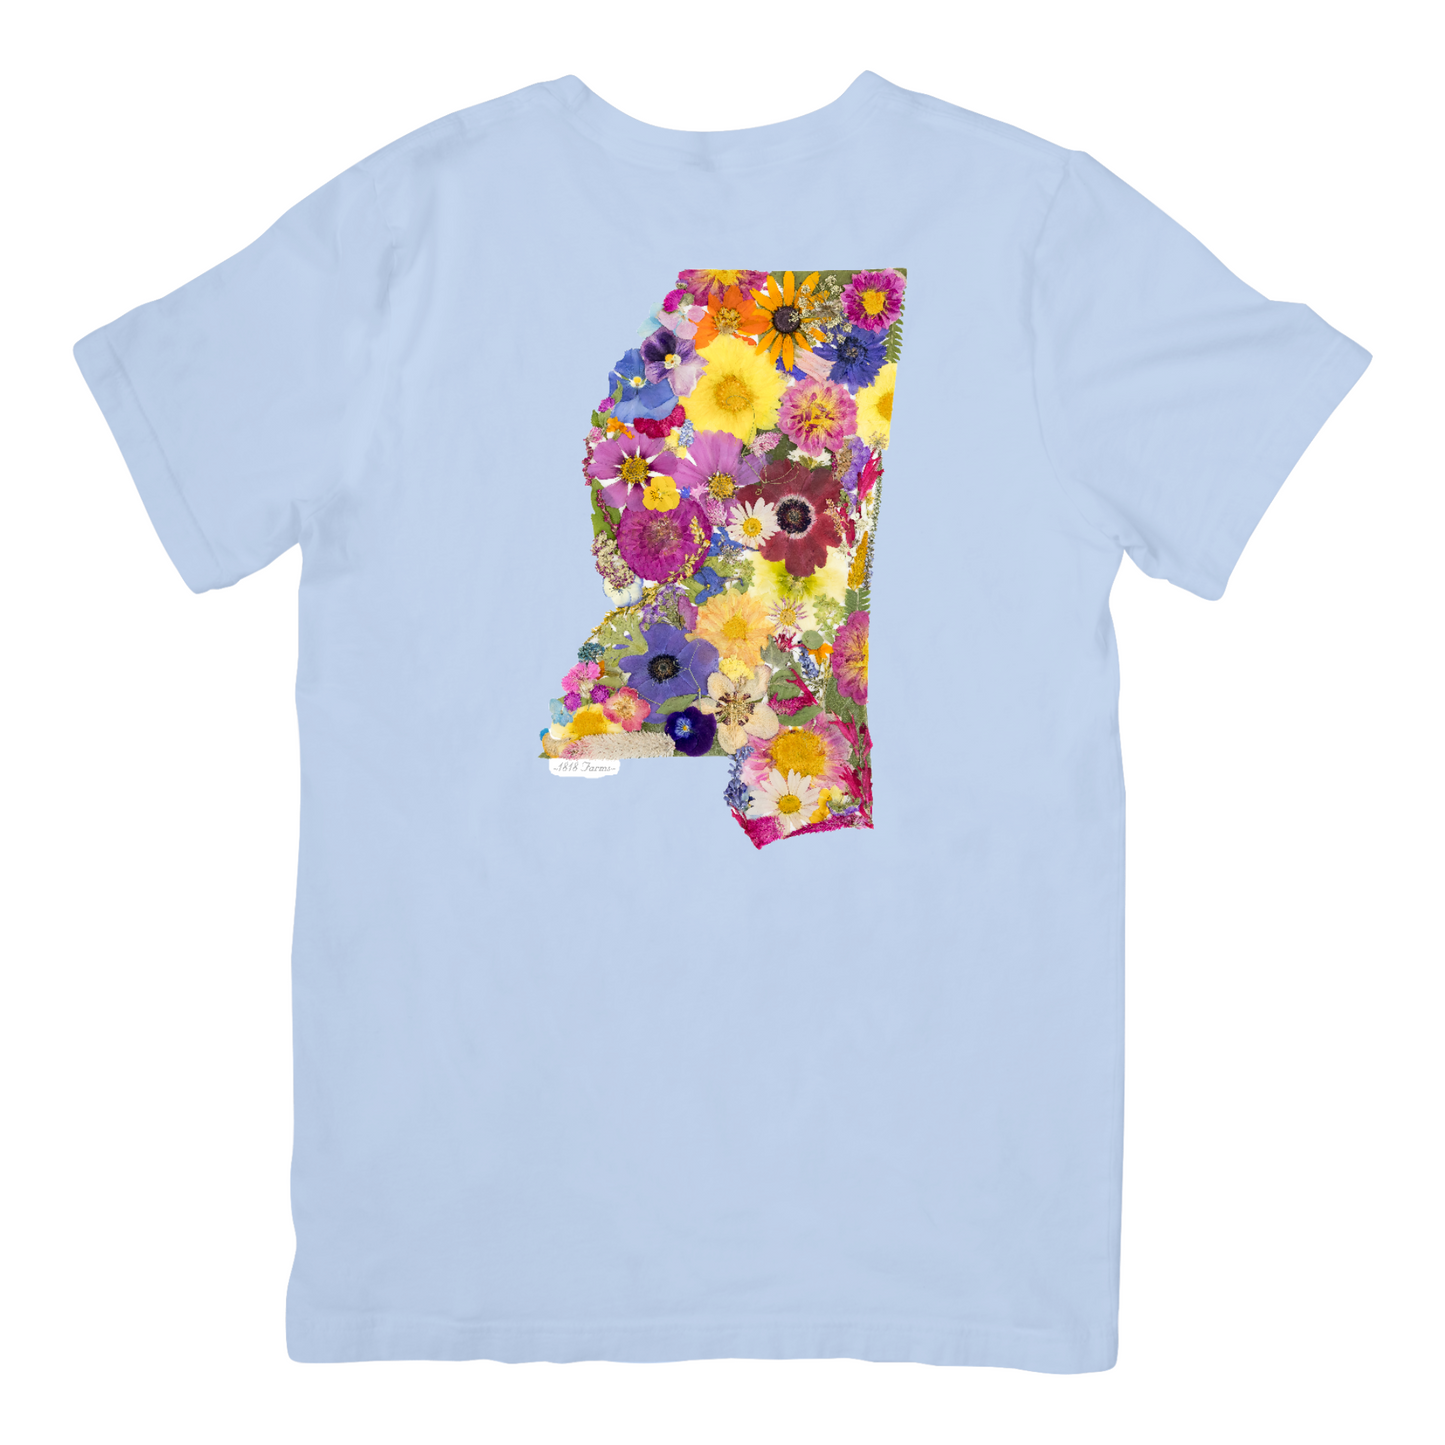 State Themed Comfort Colors Tshirt - "Where I Bloom" Collection TShirt 1818 Farms Mississippi Chambray Blue Small